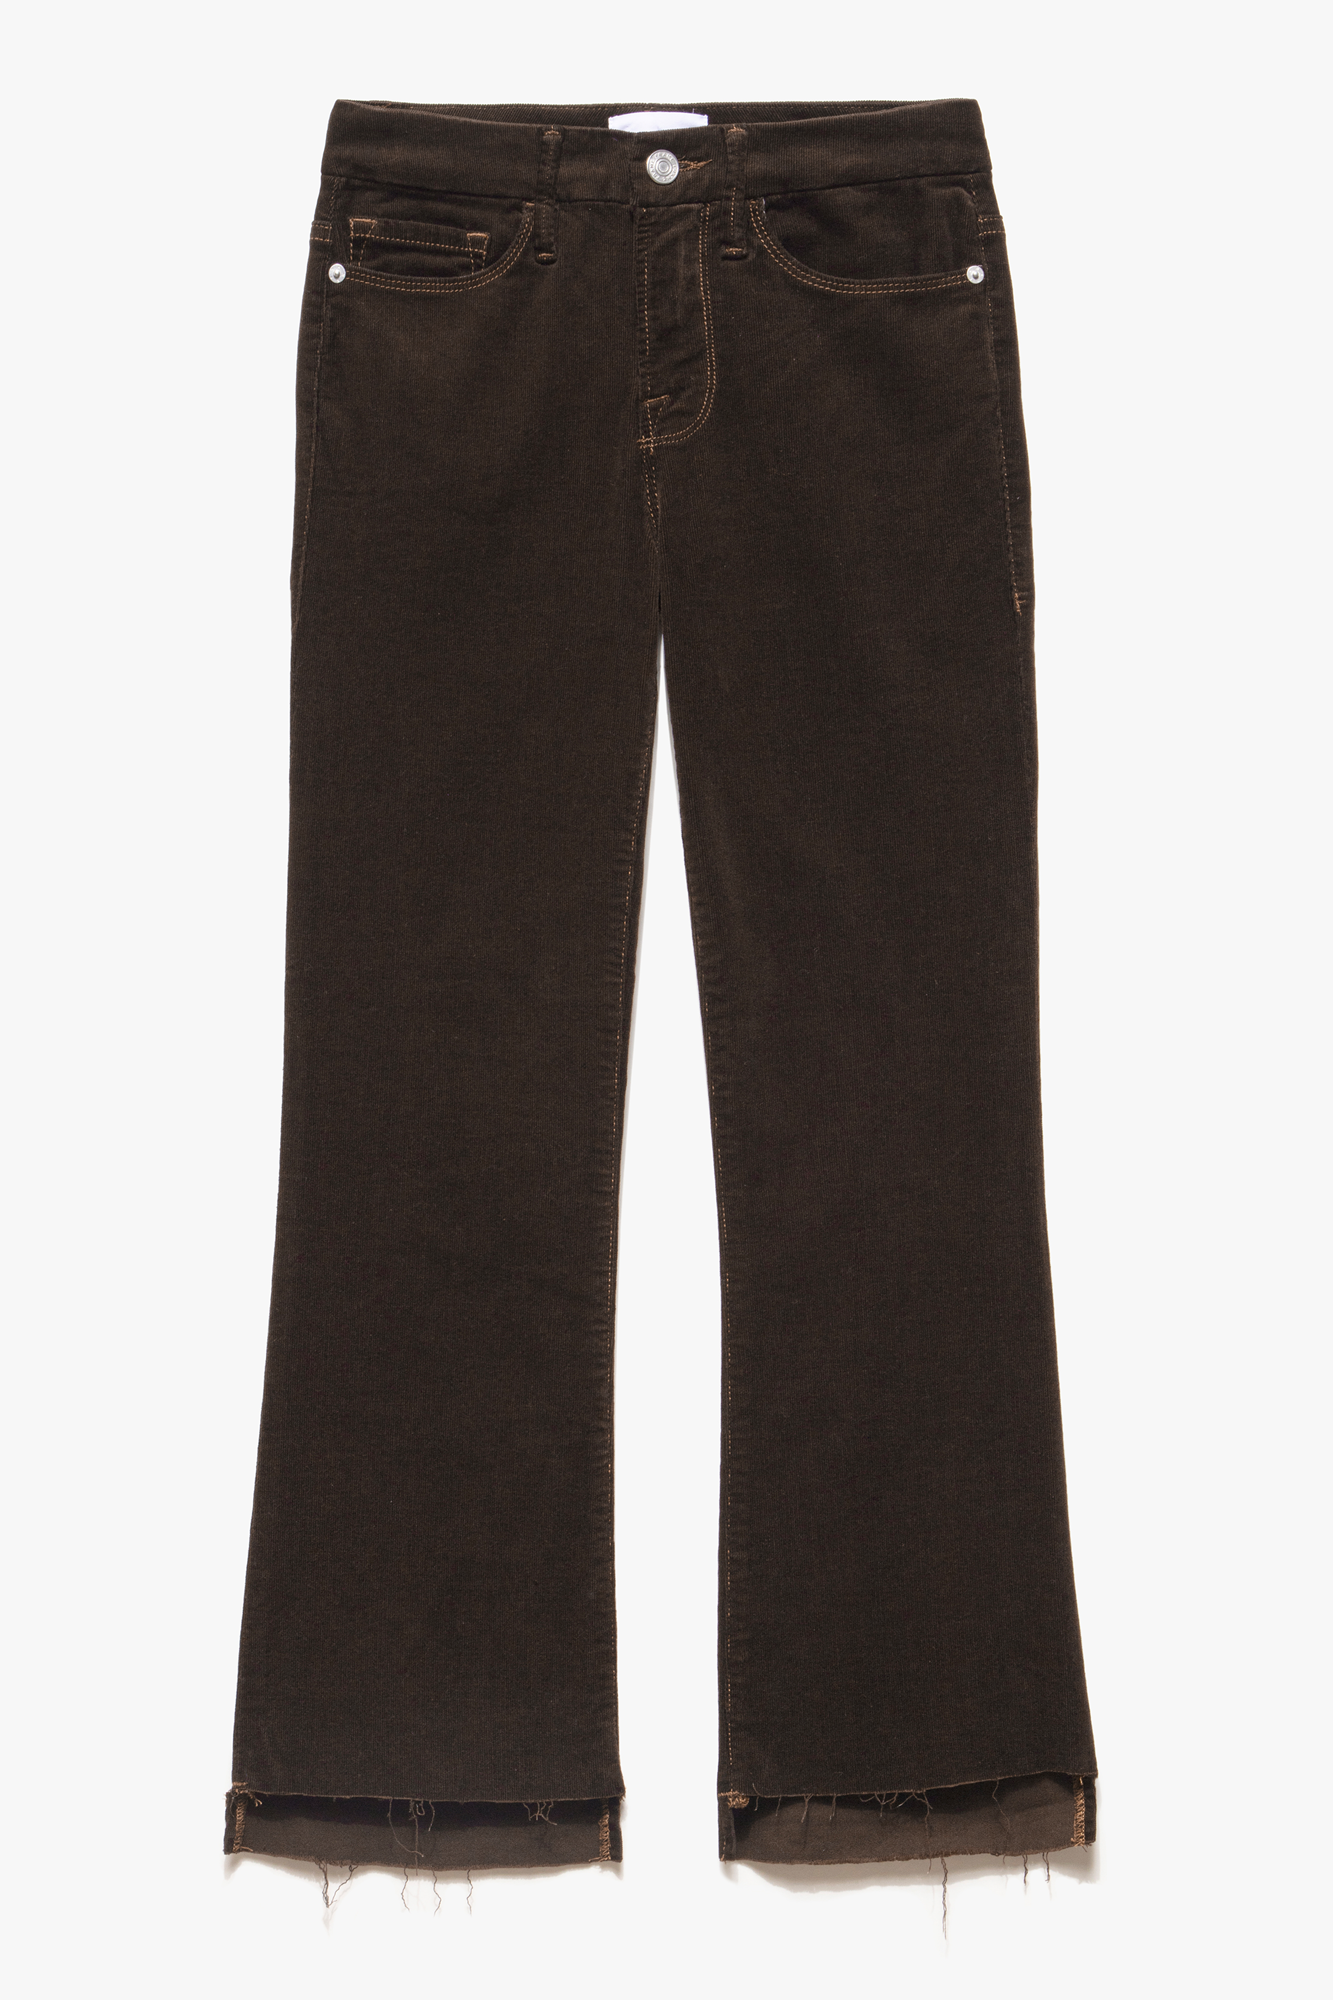 These Le Crop Mini Boot Pants from Frame boast a sleek espresso finish and feature a slim, cropped silhouette. They are designed for a supremely comfortable fit and offer maximum versatility to fit your wardrobe needs.